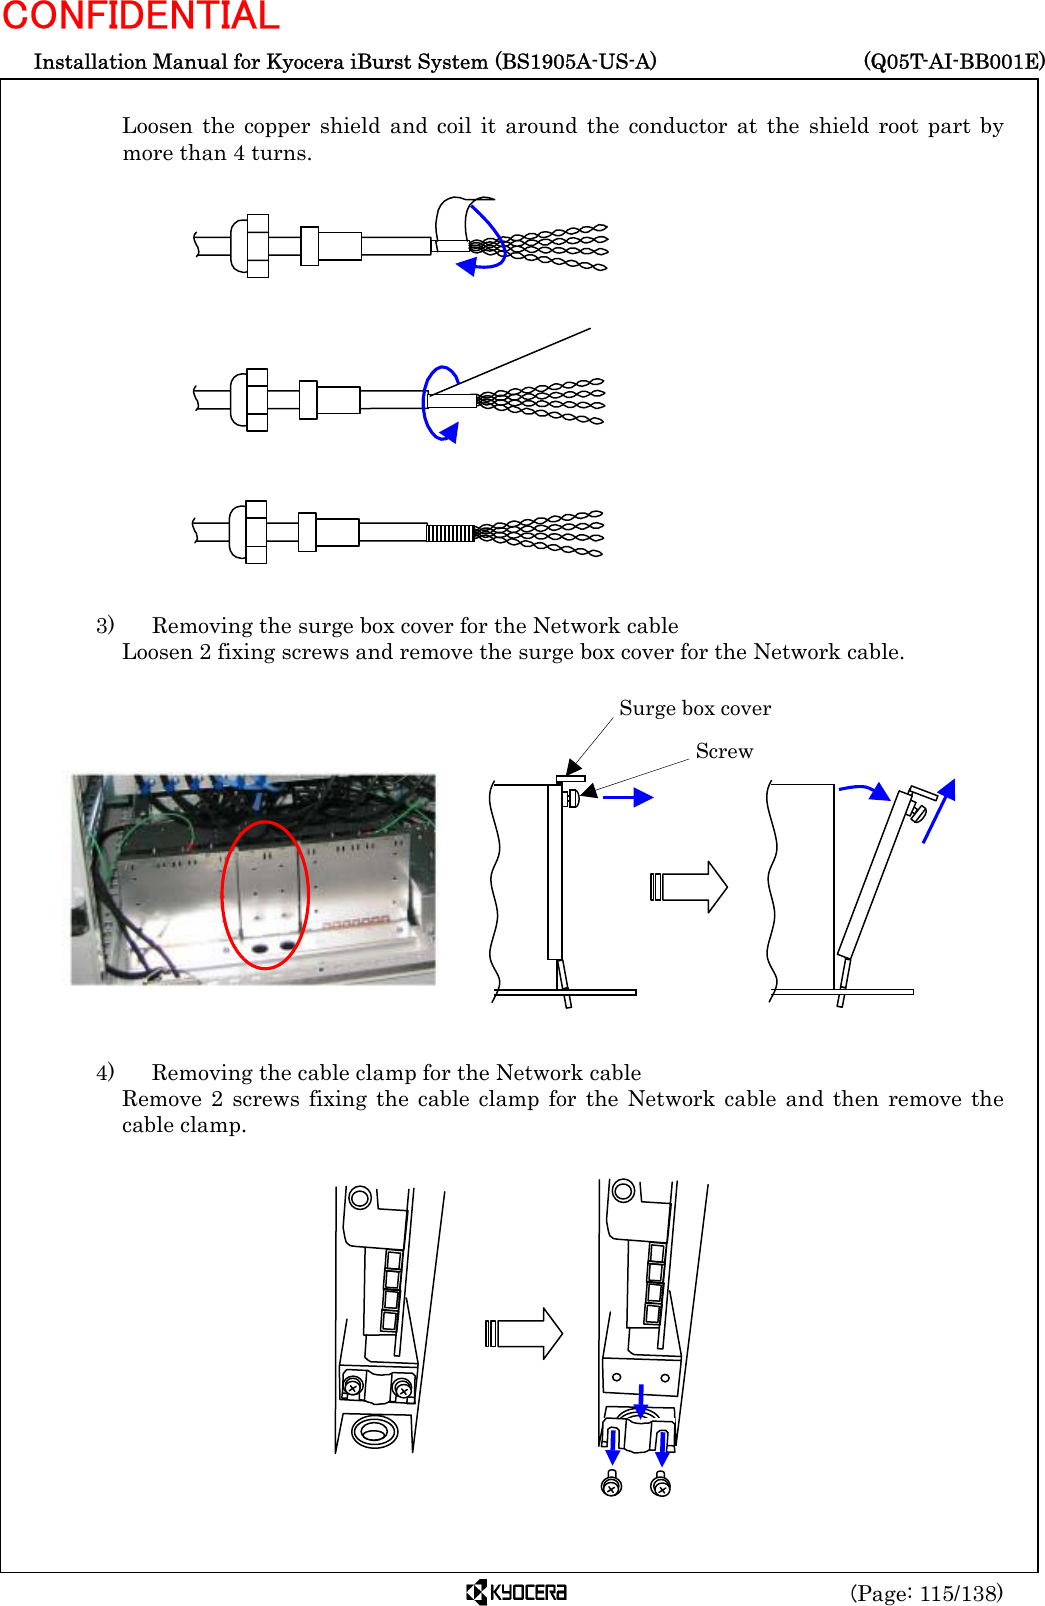  Installation Manual for Kyocera iBurst System (BS1905A-US-A)     (Q05T-AI-BB001E) (Page: 115/138) CONFIDENTIAL  Loosen the copper shield and coil it around the conductor at the shield root part by more than 4 turns.                  3)    Removing the surge box cover for the Network cable Loosen 2 fixing screws and remove the surge box cover for the Network cable.                4)    Removing the cable clamp for the Network cable Remove 2 screws fixing the cable clamp for the Network cable and then remove the cable clamp.              Surge box cover  Screw 